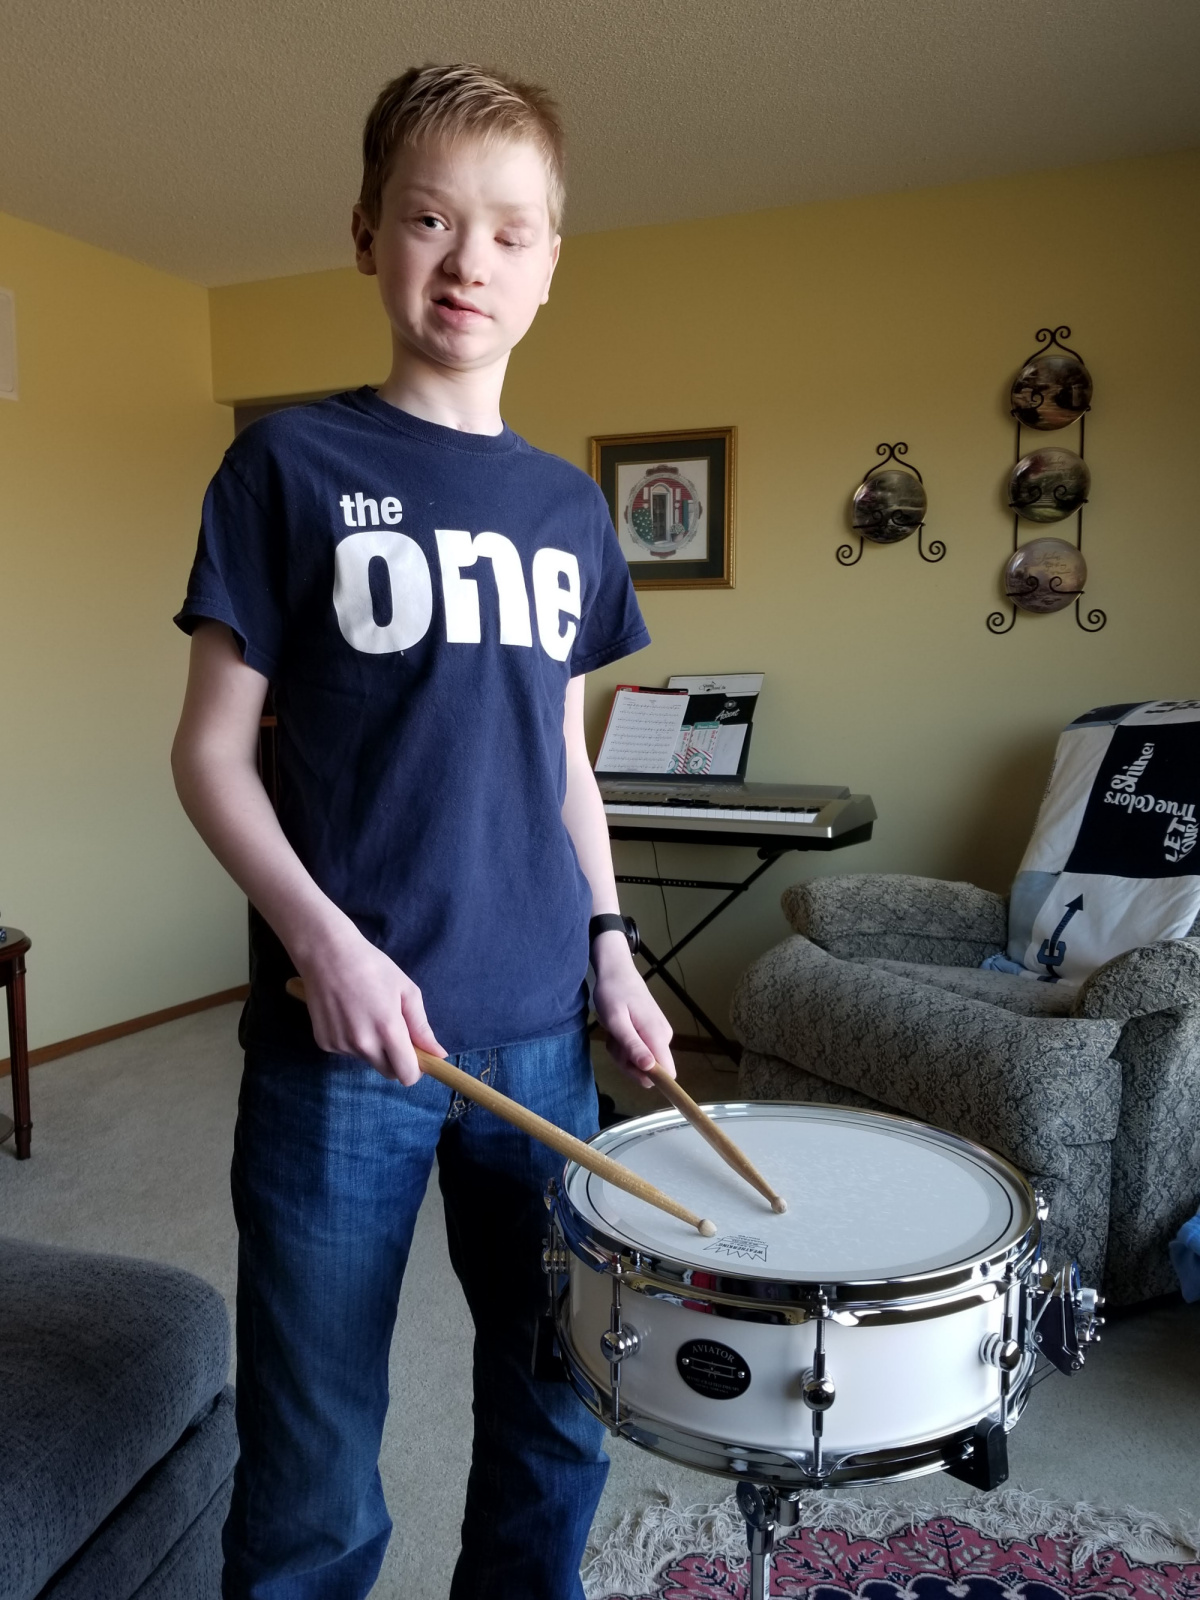 Practicing the snare drum solo!